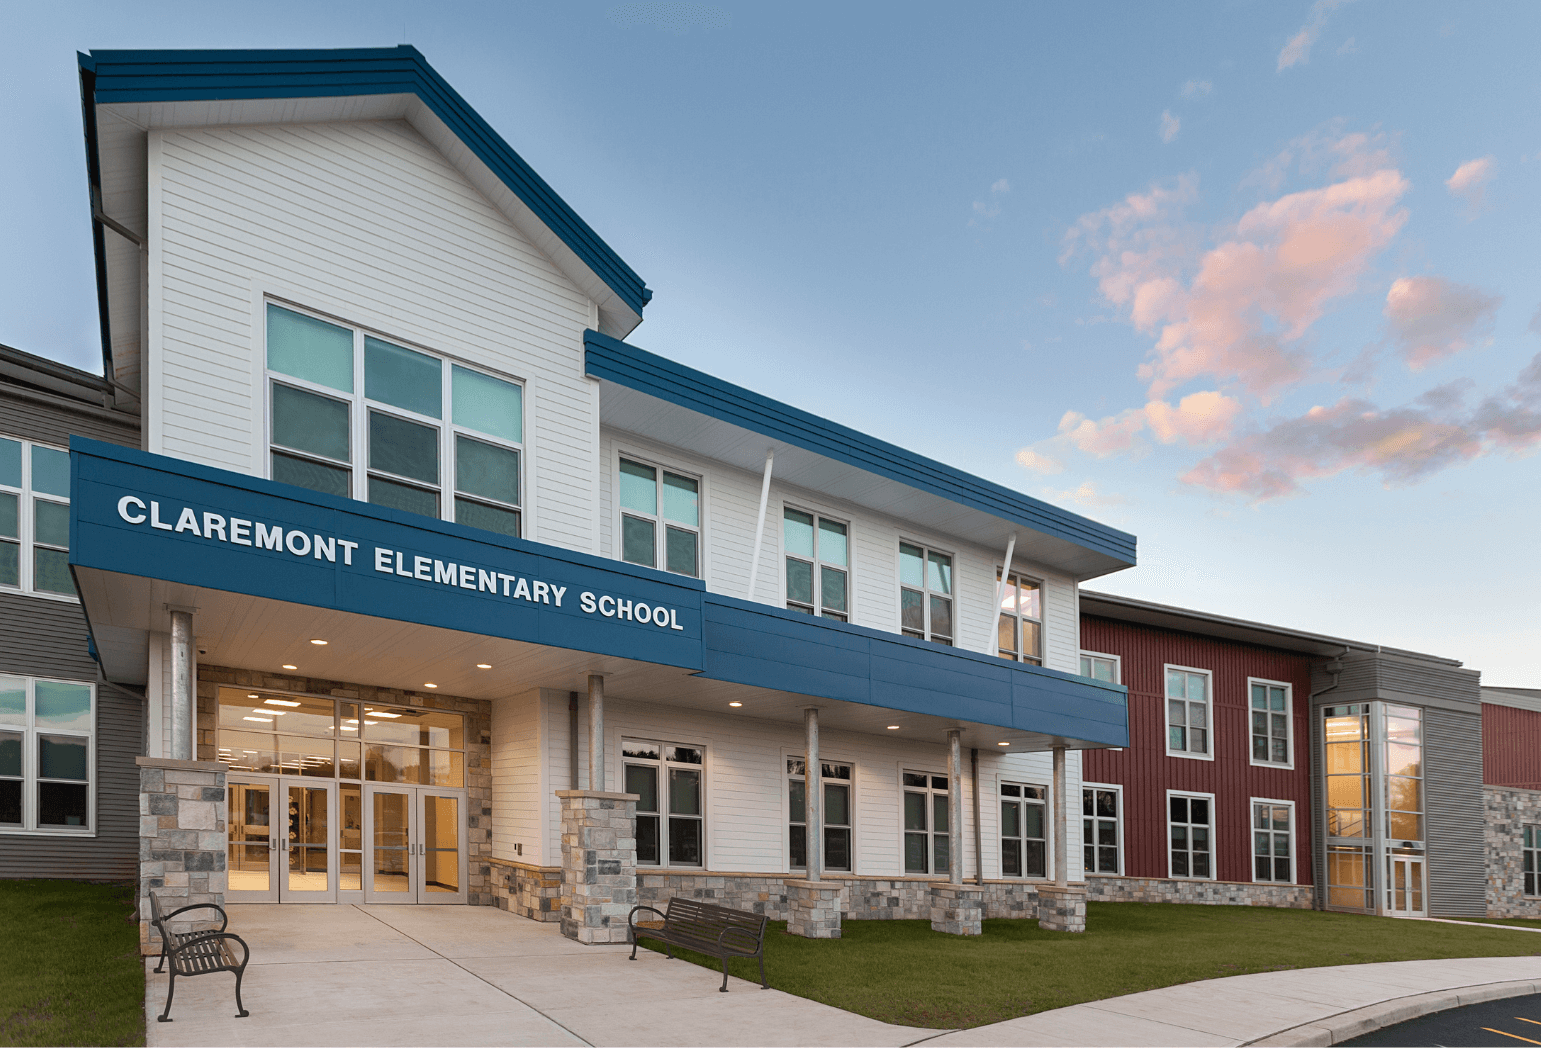 An exterior look at Claremont Elementary School.